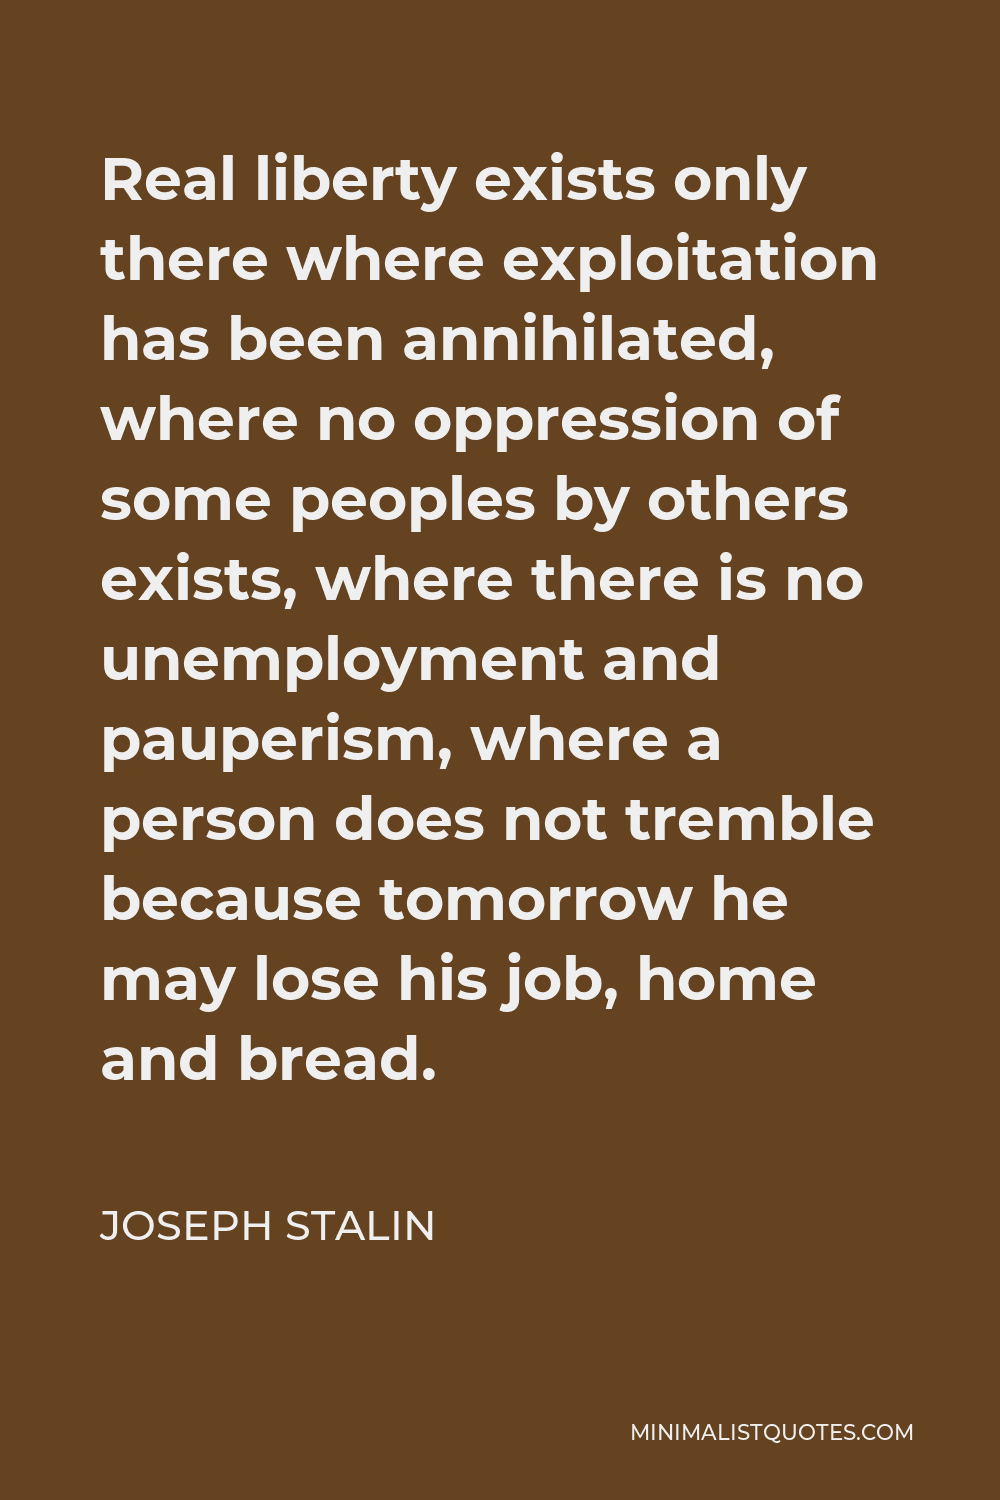 Joseph Stalin Quote - Real liberty exists only there where exploitation has been annihilated, where no oppression of some peoples by others exists, where there is no unemployment and pauperism, where a person does not tremble because tomorrow he may lose his job, home and bread.